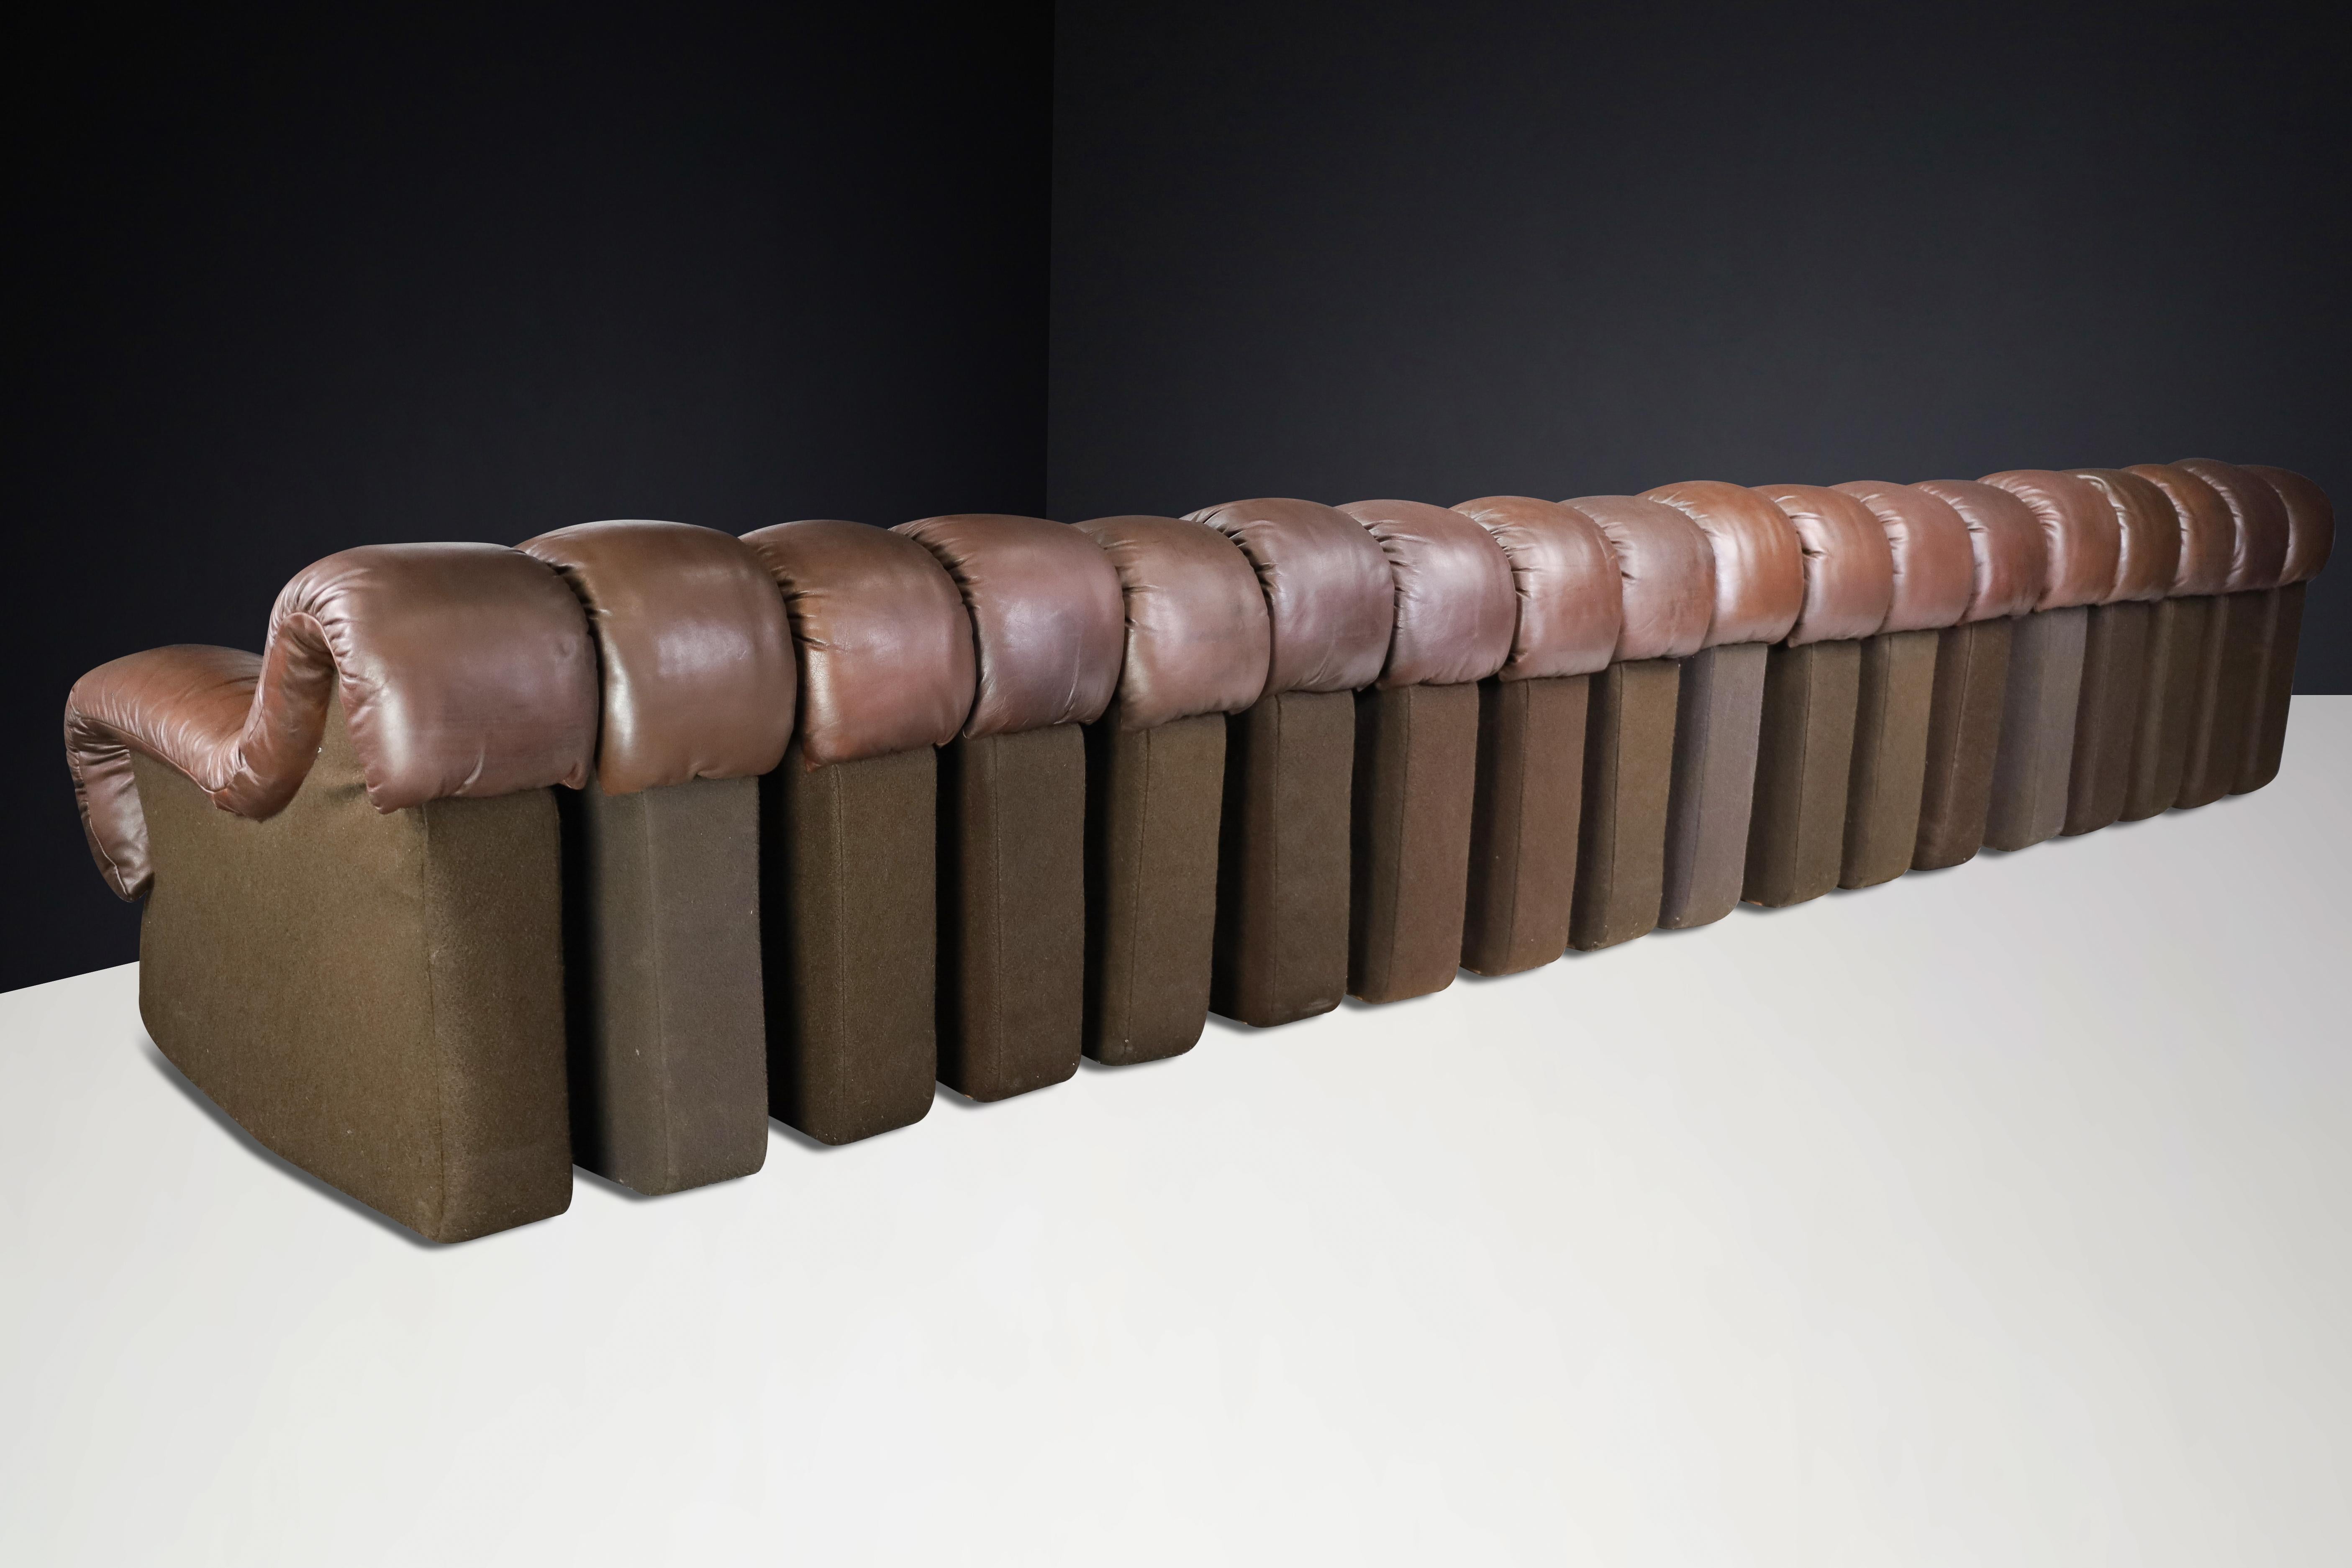 Swiss De Sede DS-600 'Snake' Sectional Sofa in Patinated Brown Leather by Ueli Berger. For Sale